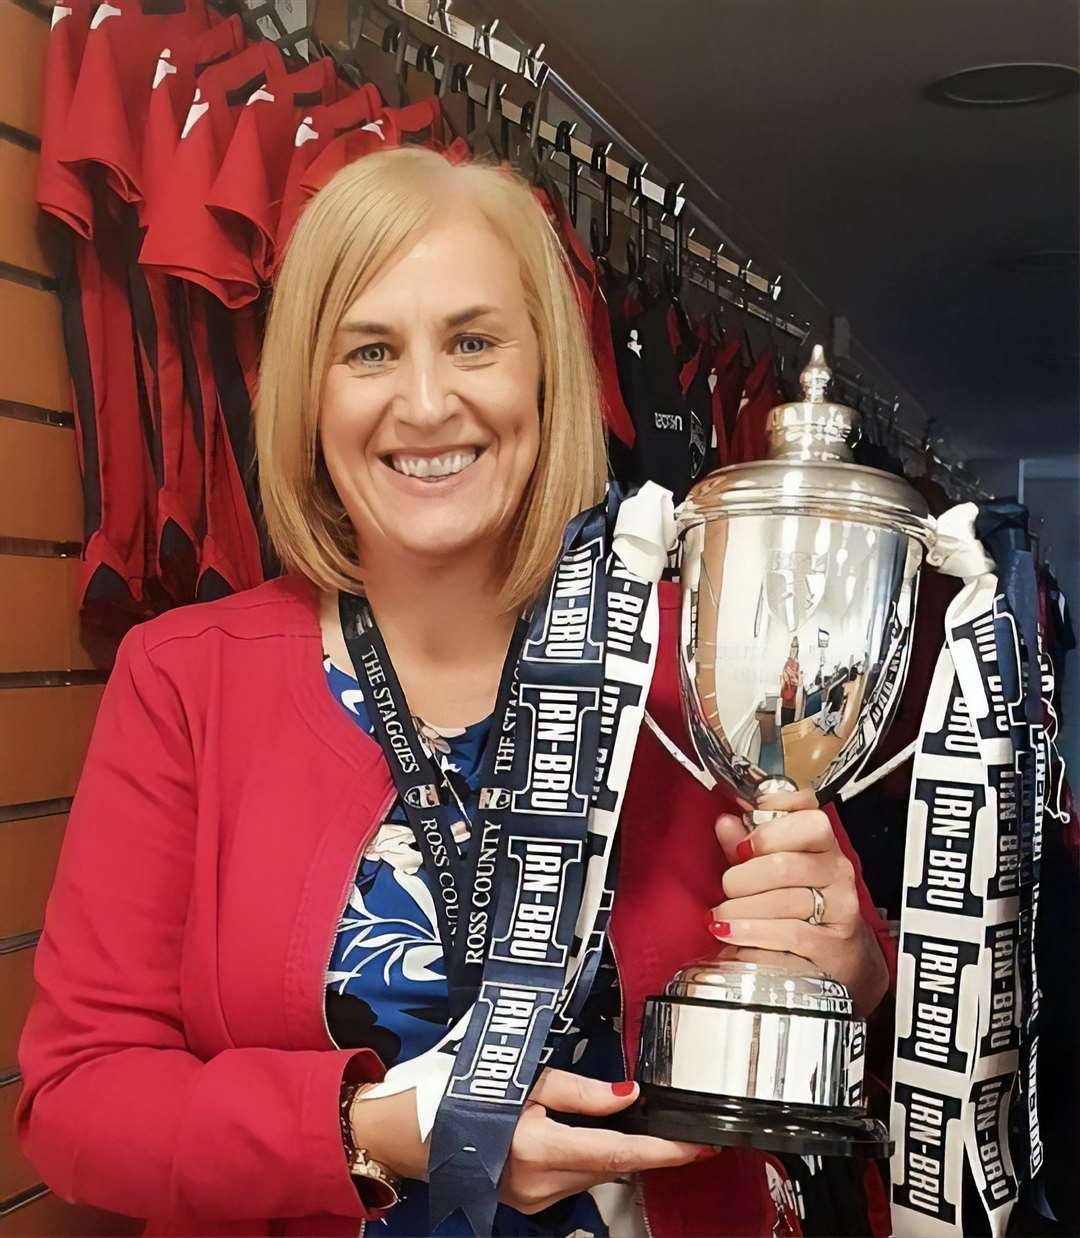 Lorraine holding the IRN-BRU Cup (SPFL Challenge Cup) which Ross County won last season.